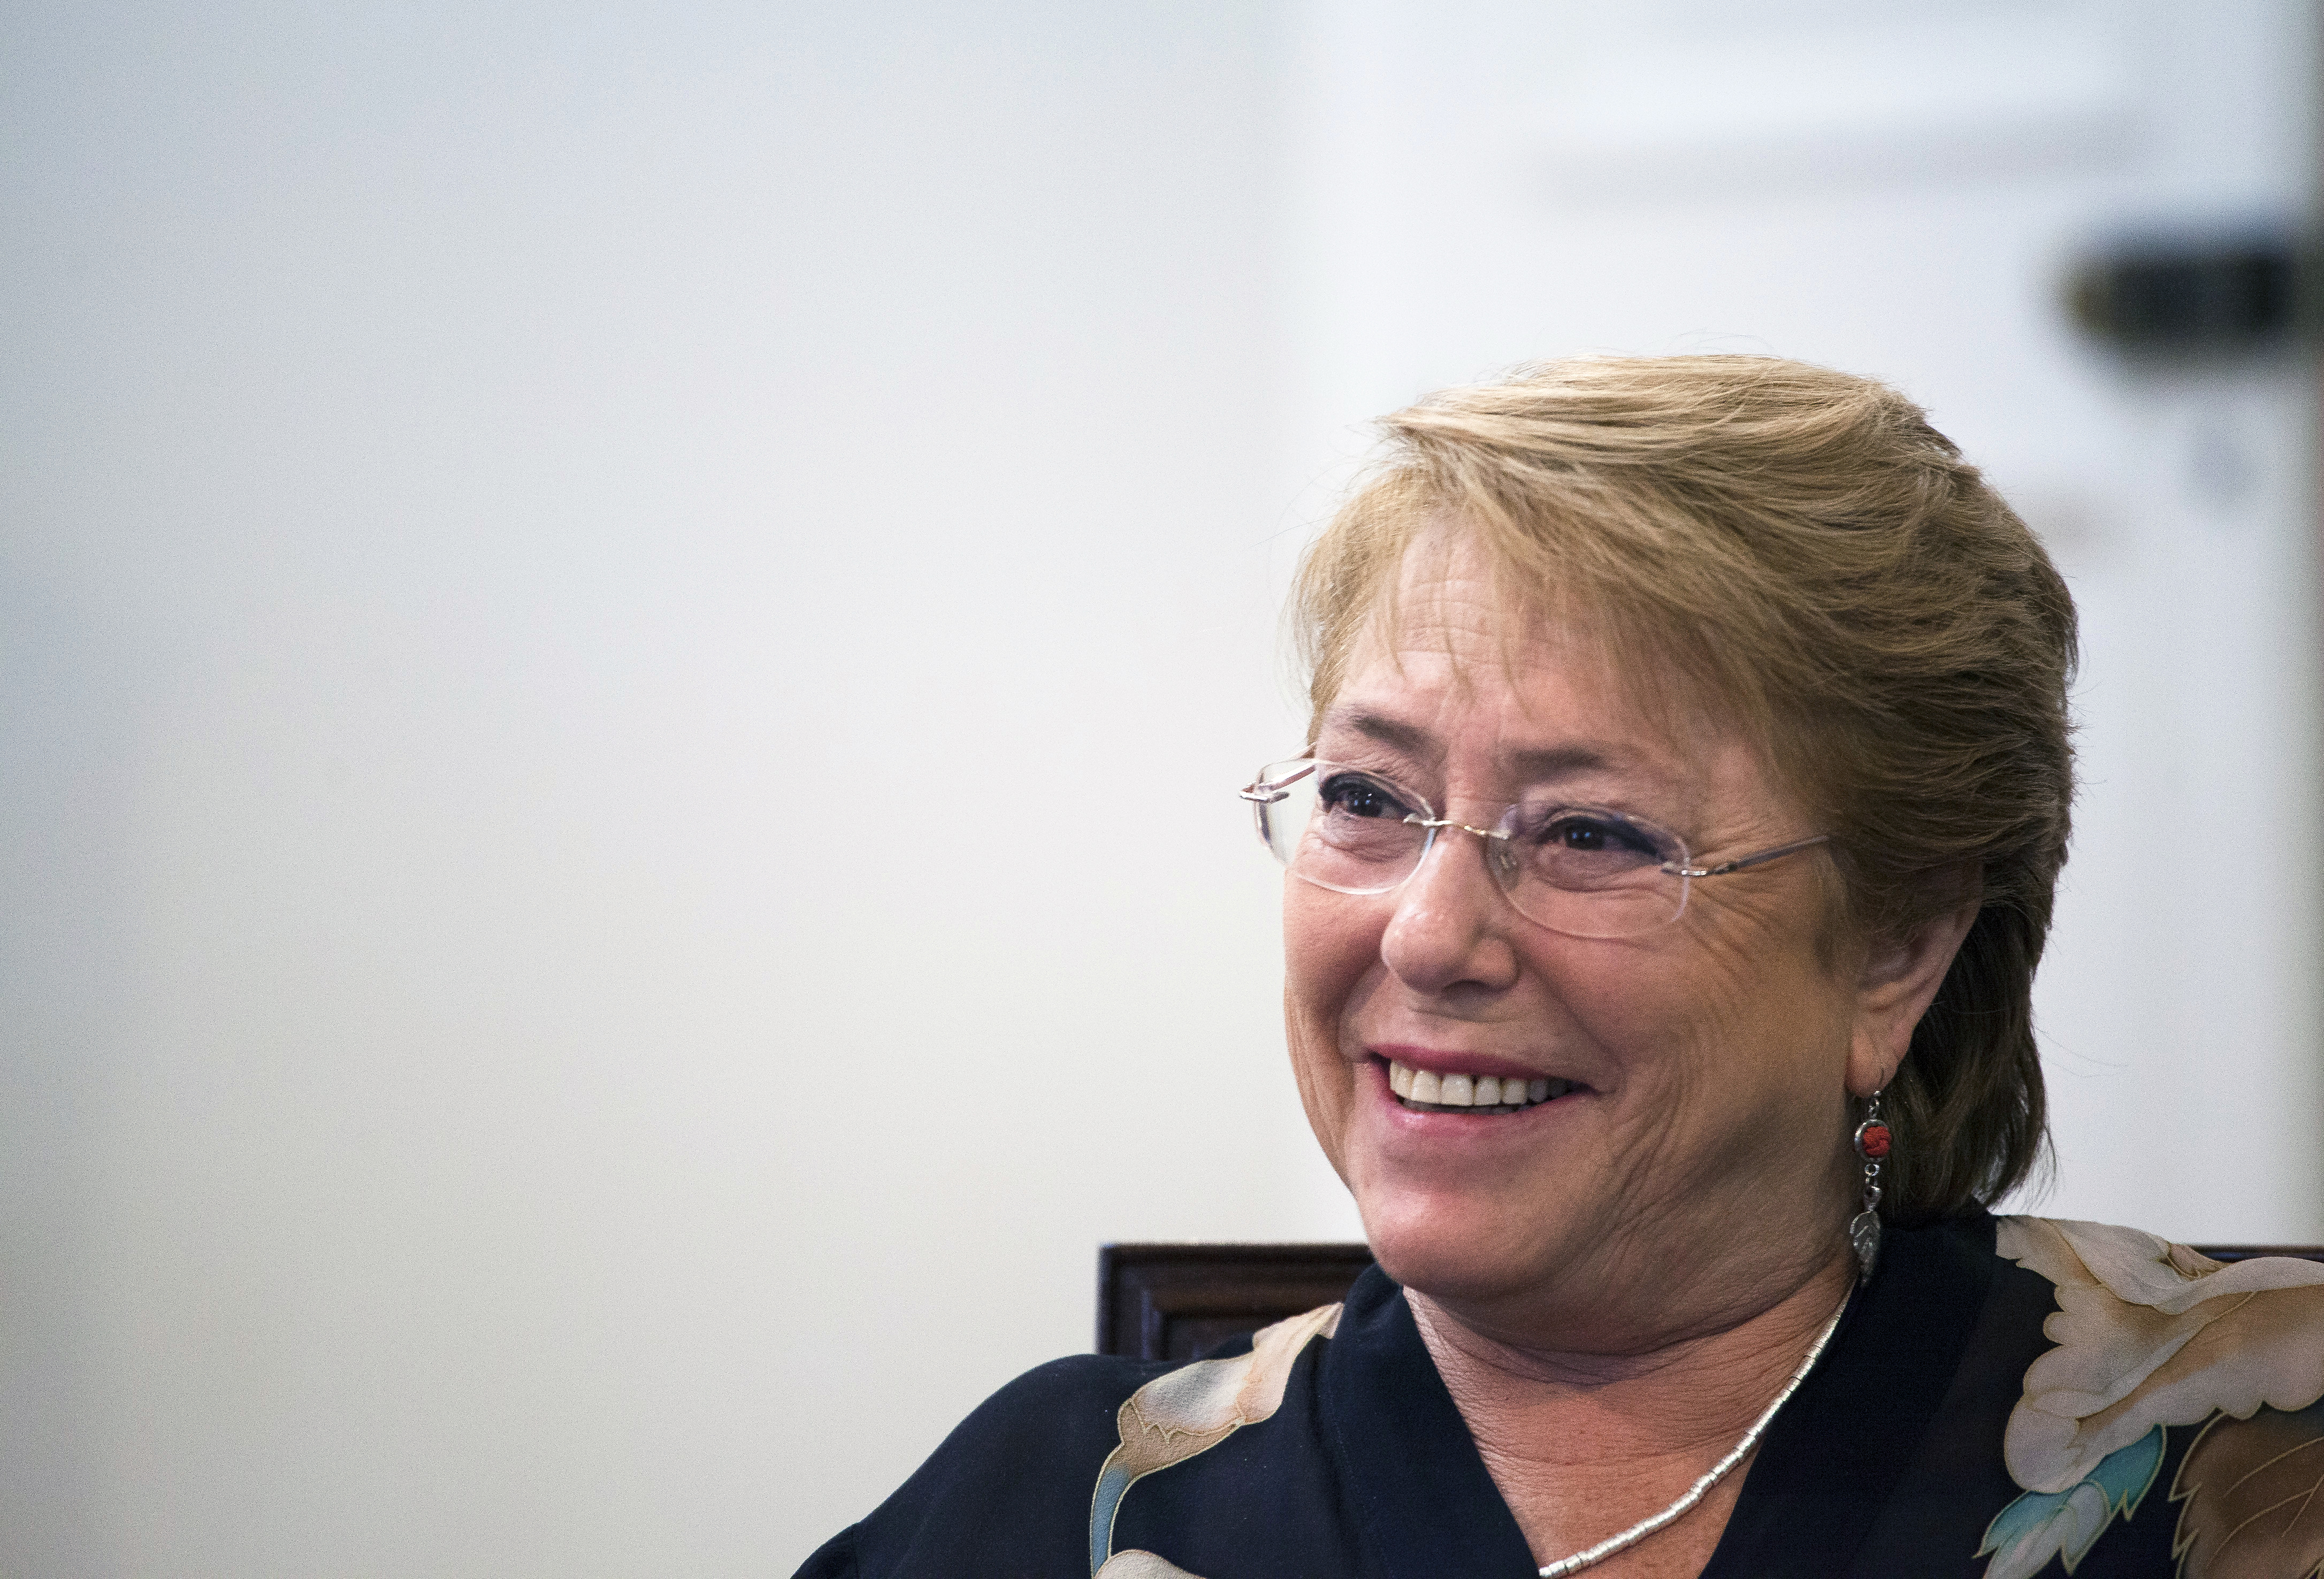 Michelle Bachelet, president of Chile, smiles during an interview at La Moneda Palace in Santiago, Chile, on Friday, Jan. 20, 2017. (Cristobal Olivares—Bloomberg/Getty Images)